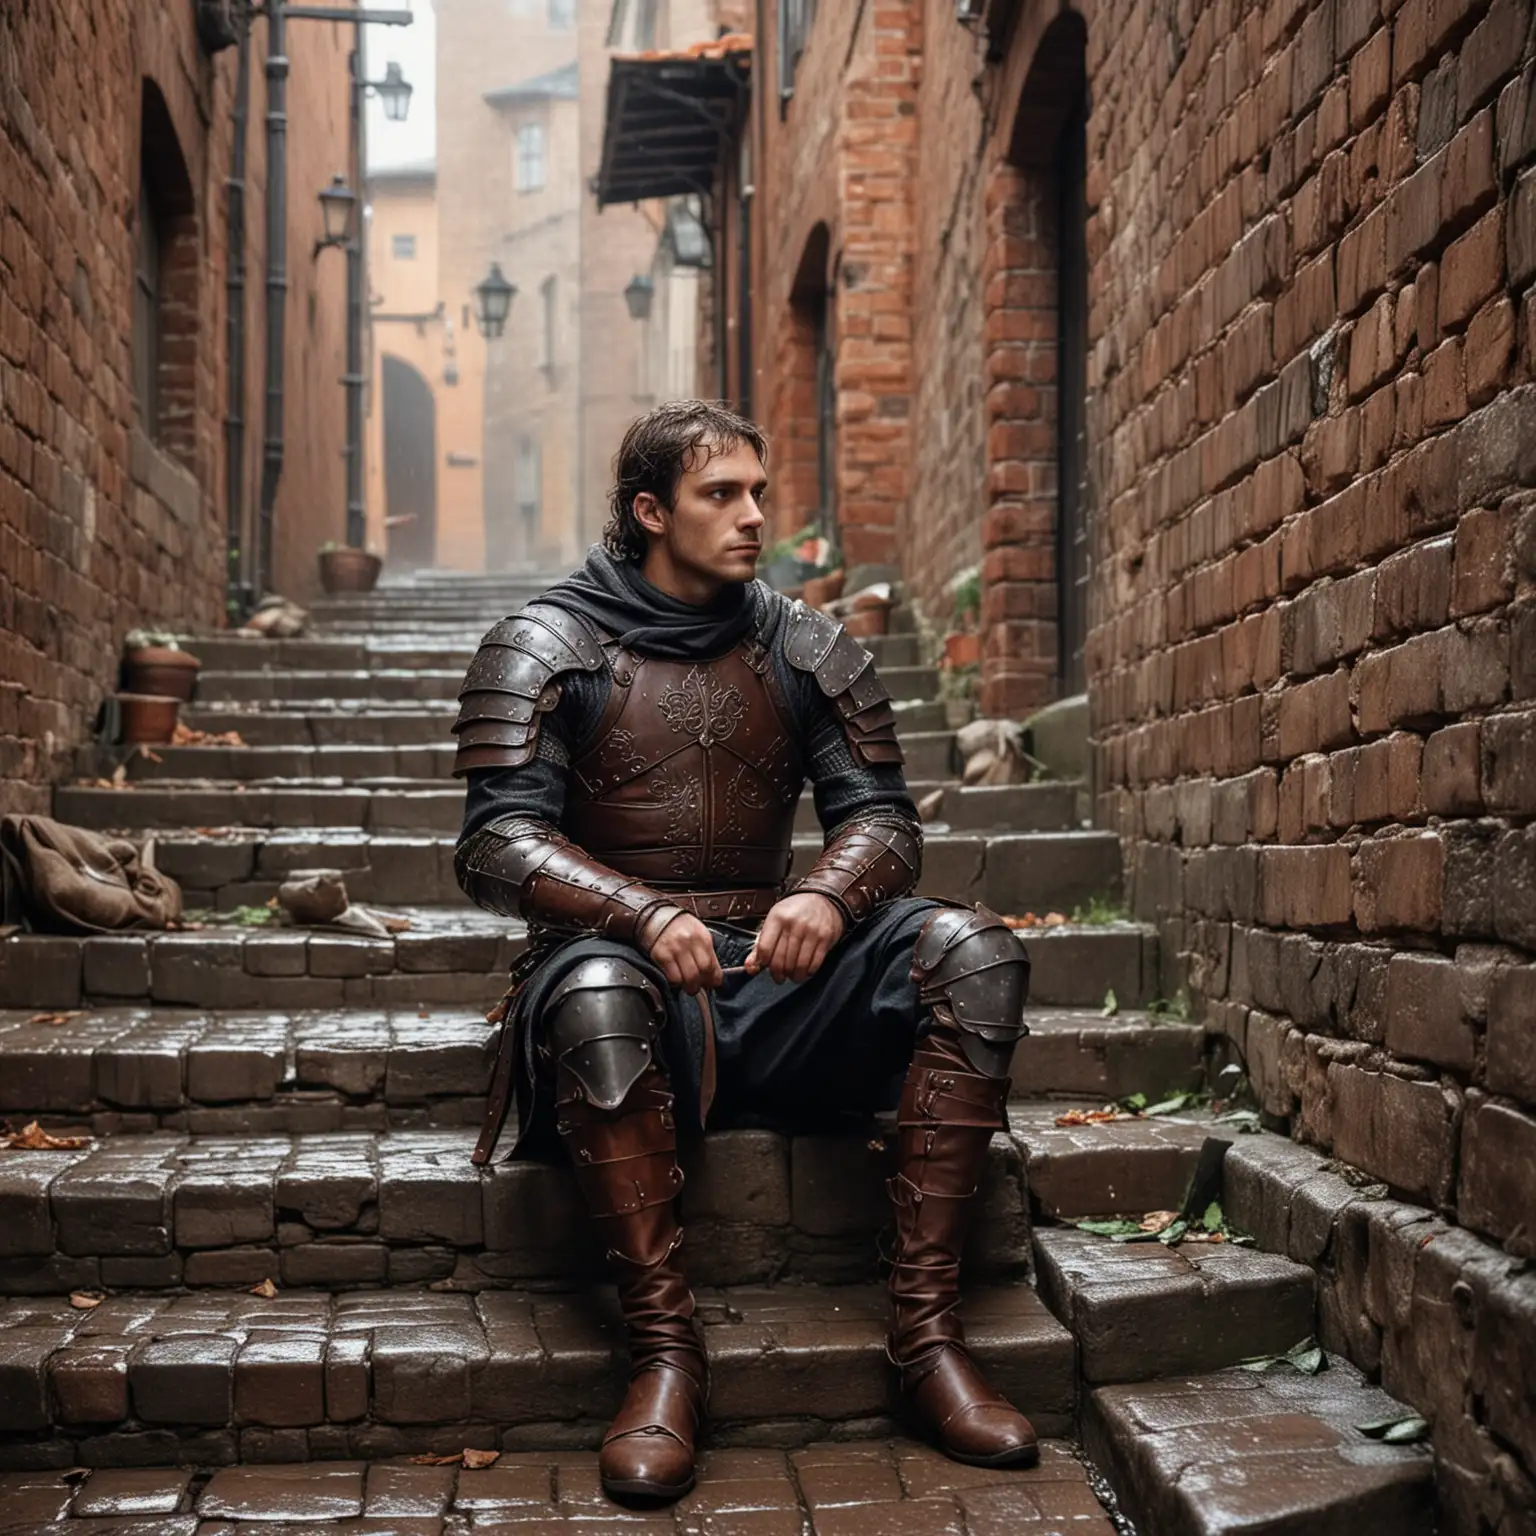 a warrior in a leather armor sits on the steps in an alley, rain, lively street, medieval, brick wall in the background